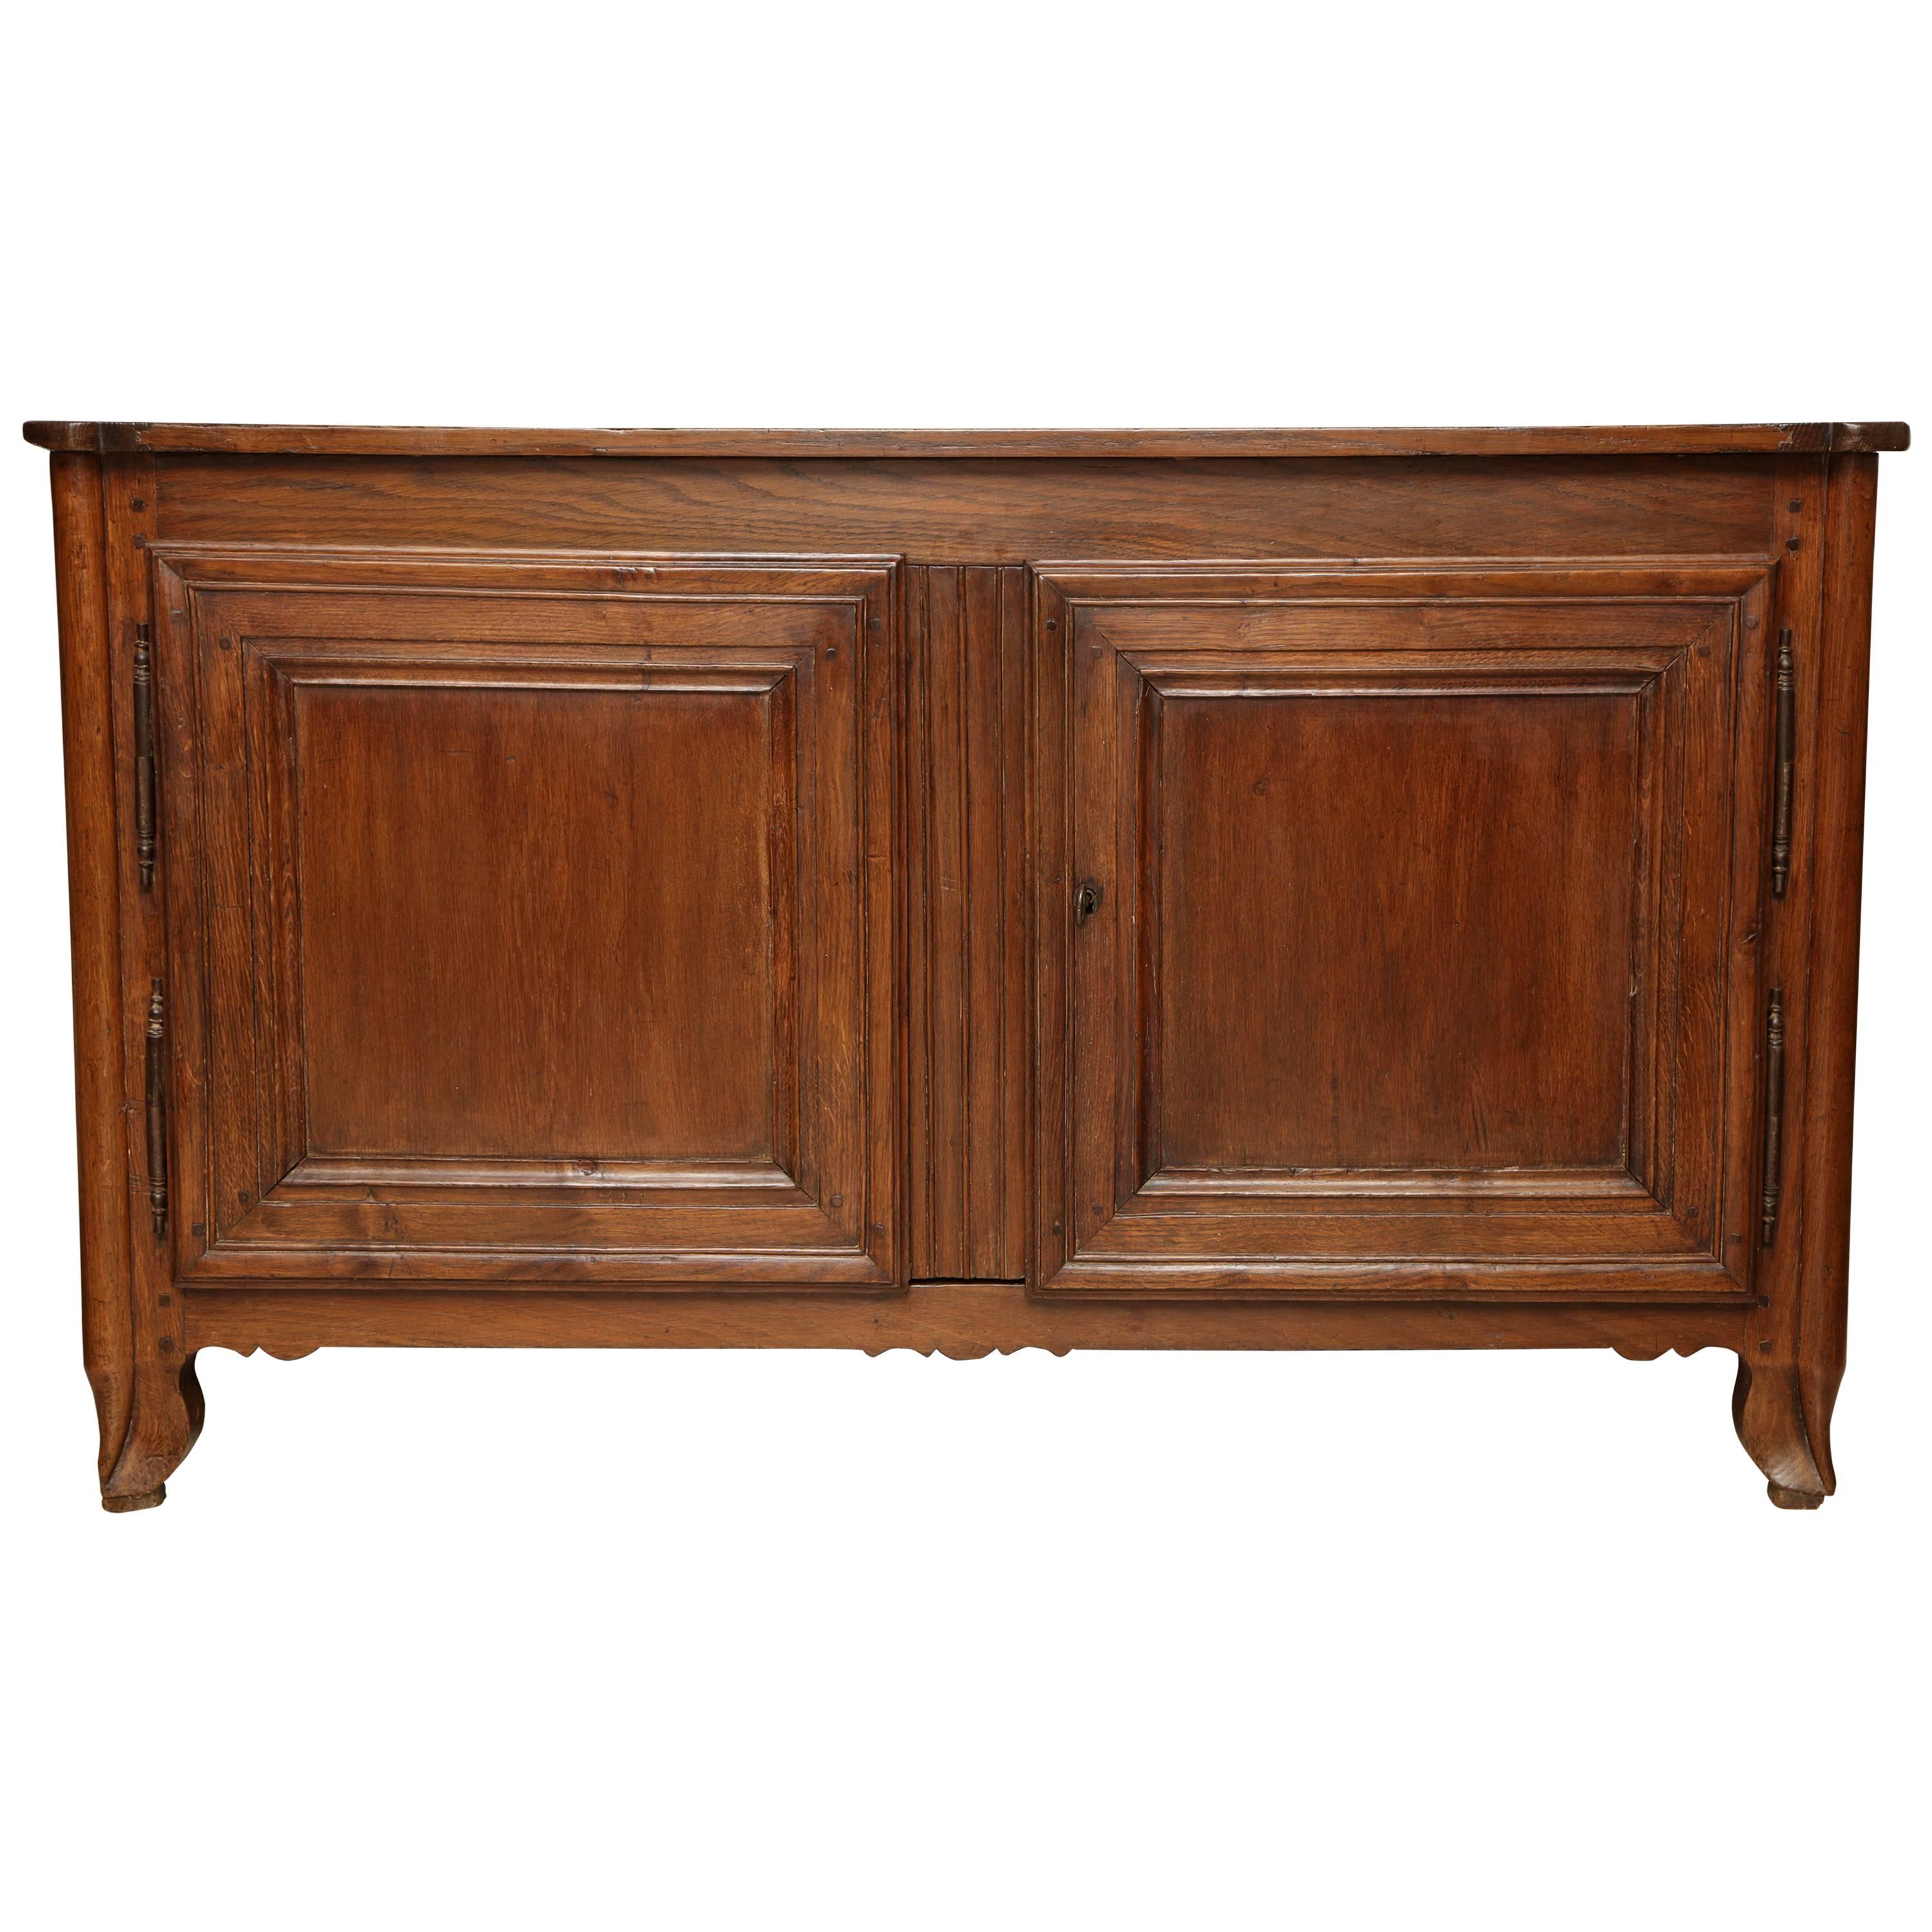 18th Century French Country Oak Sideboard with Two Paneled Doors